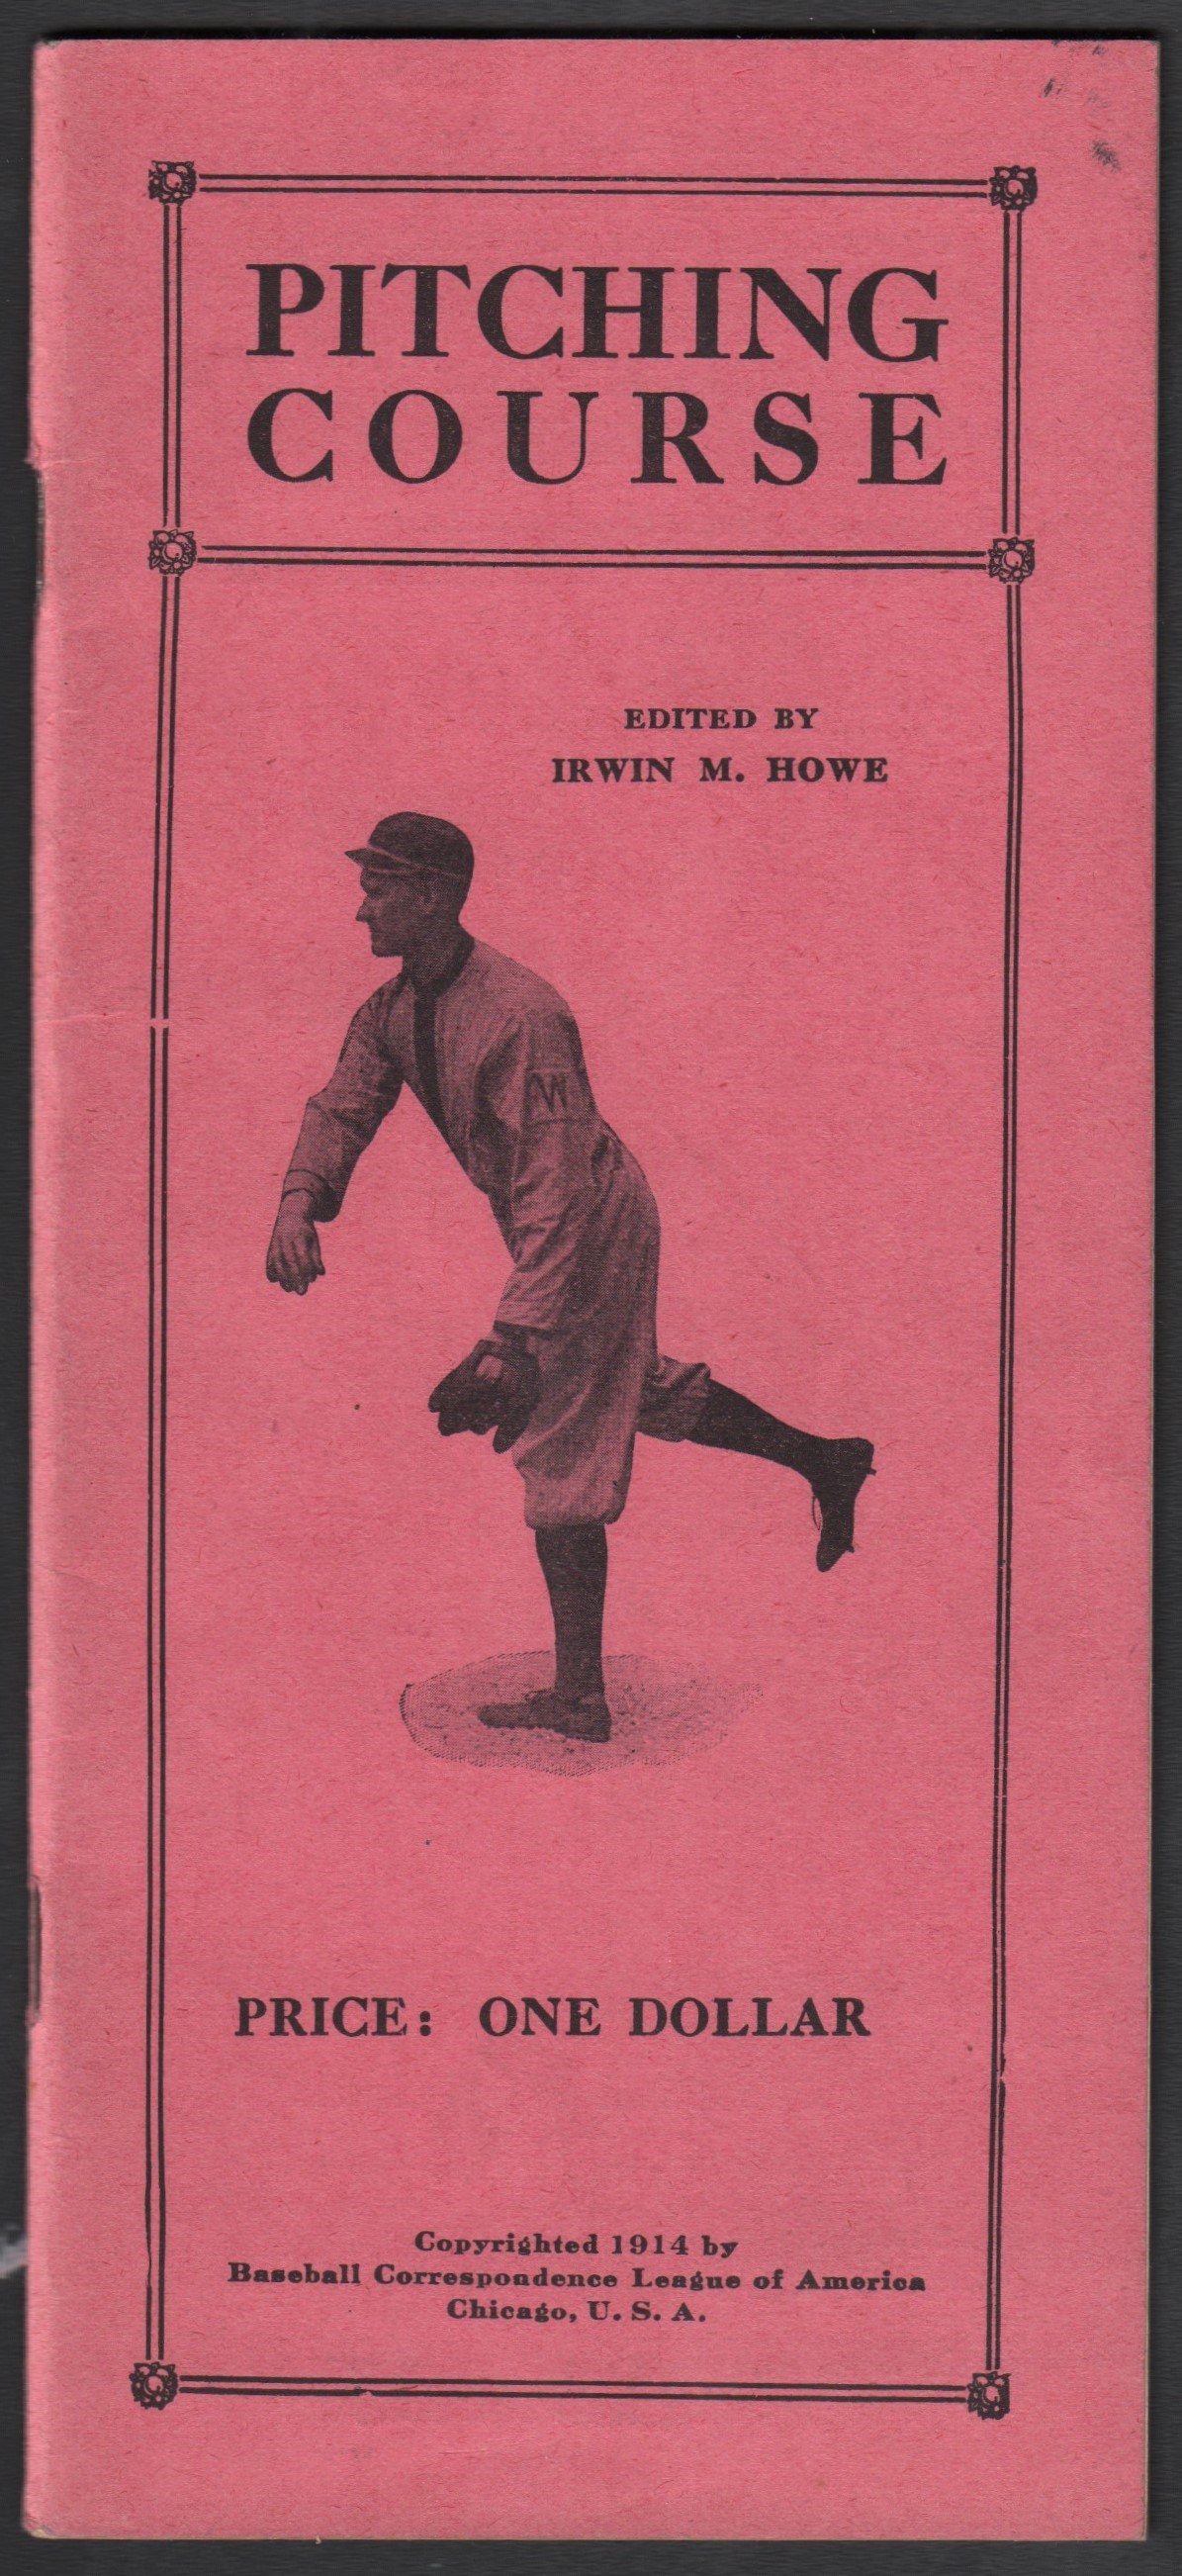 Early Baseball - 1914 Pitching Course Photo Illustrated Book